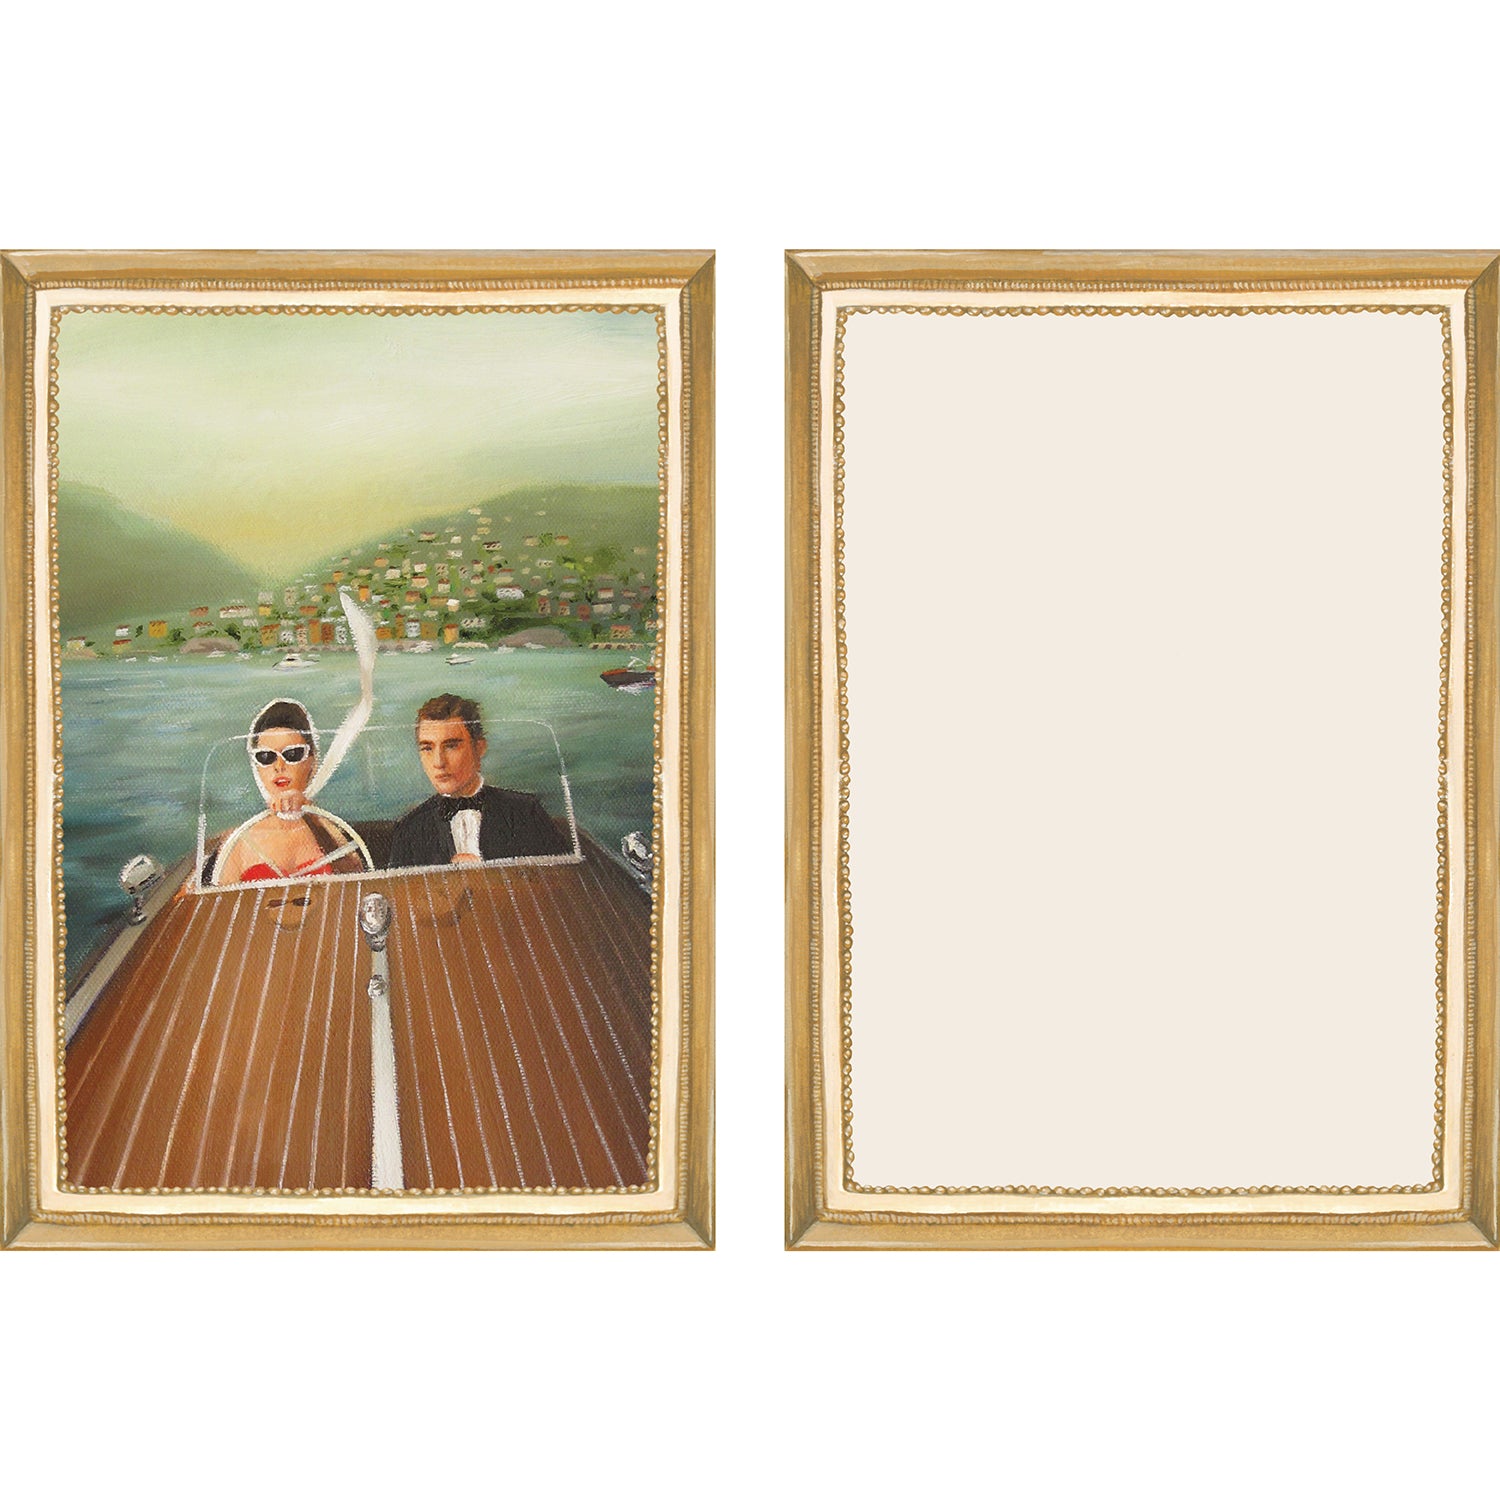 Jet Setter Flat Note Boxed Set of 6 Cards